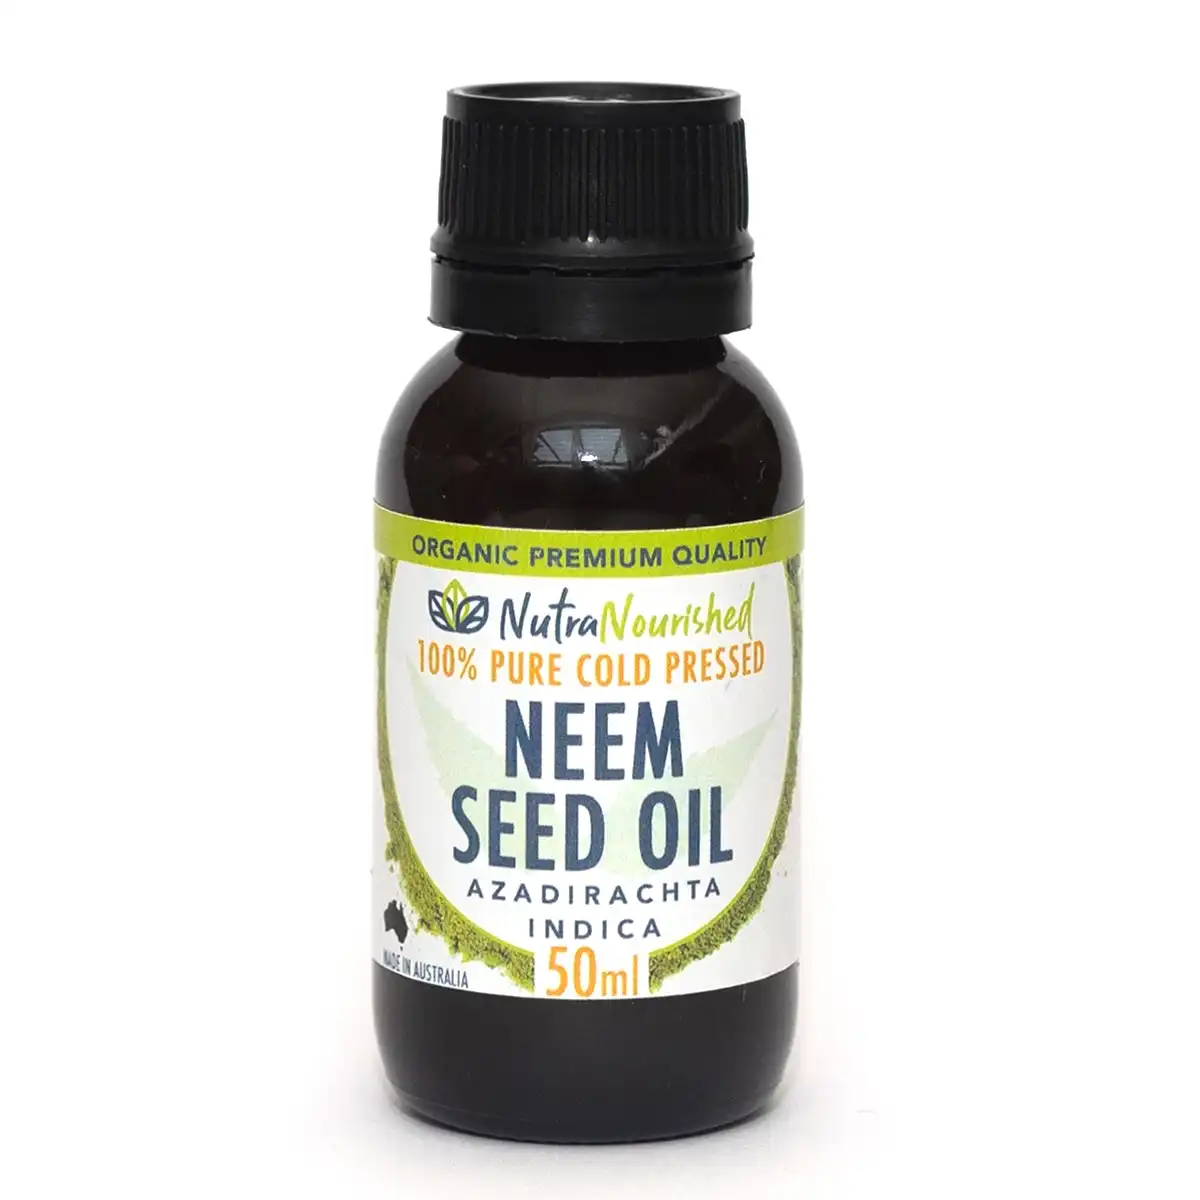 Nutra Nourished Neem Seed Oil Organic Pure Natural 50ml